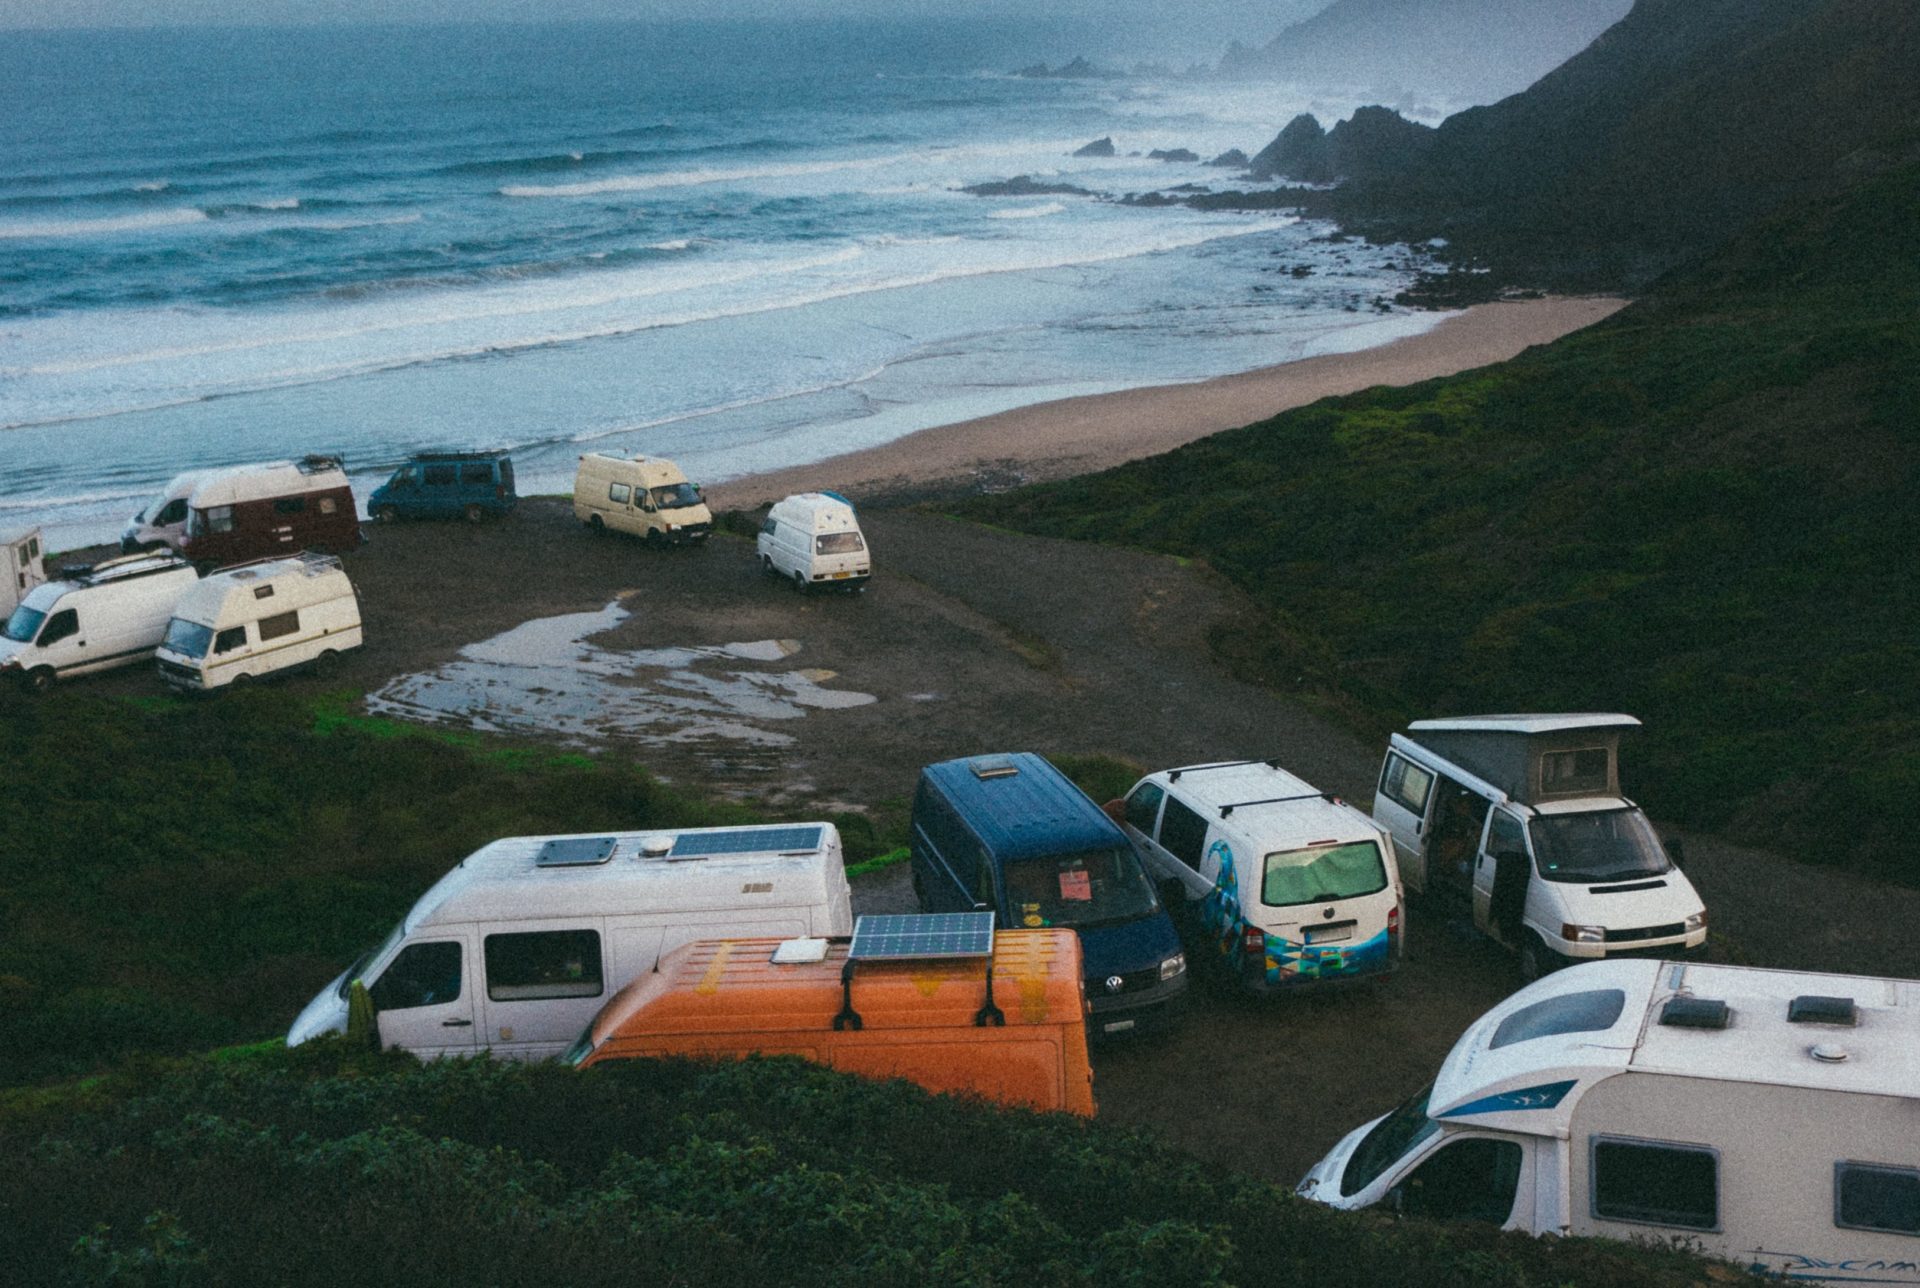 How to Choose the Best Van for Camper Conversion